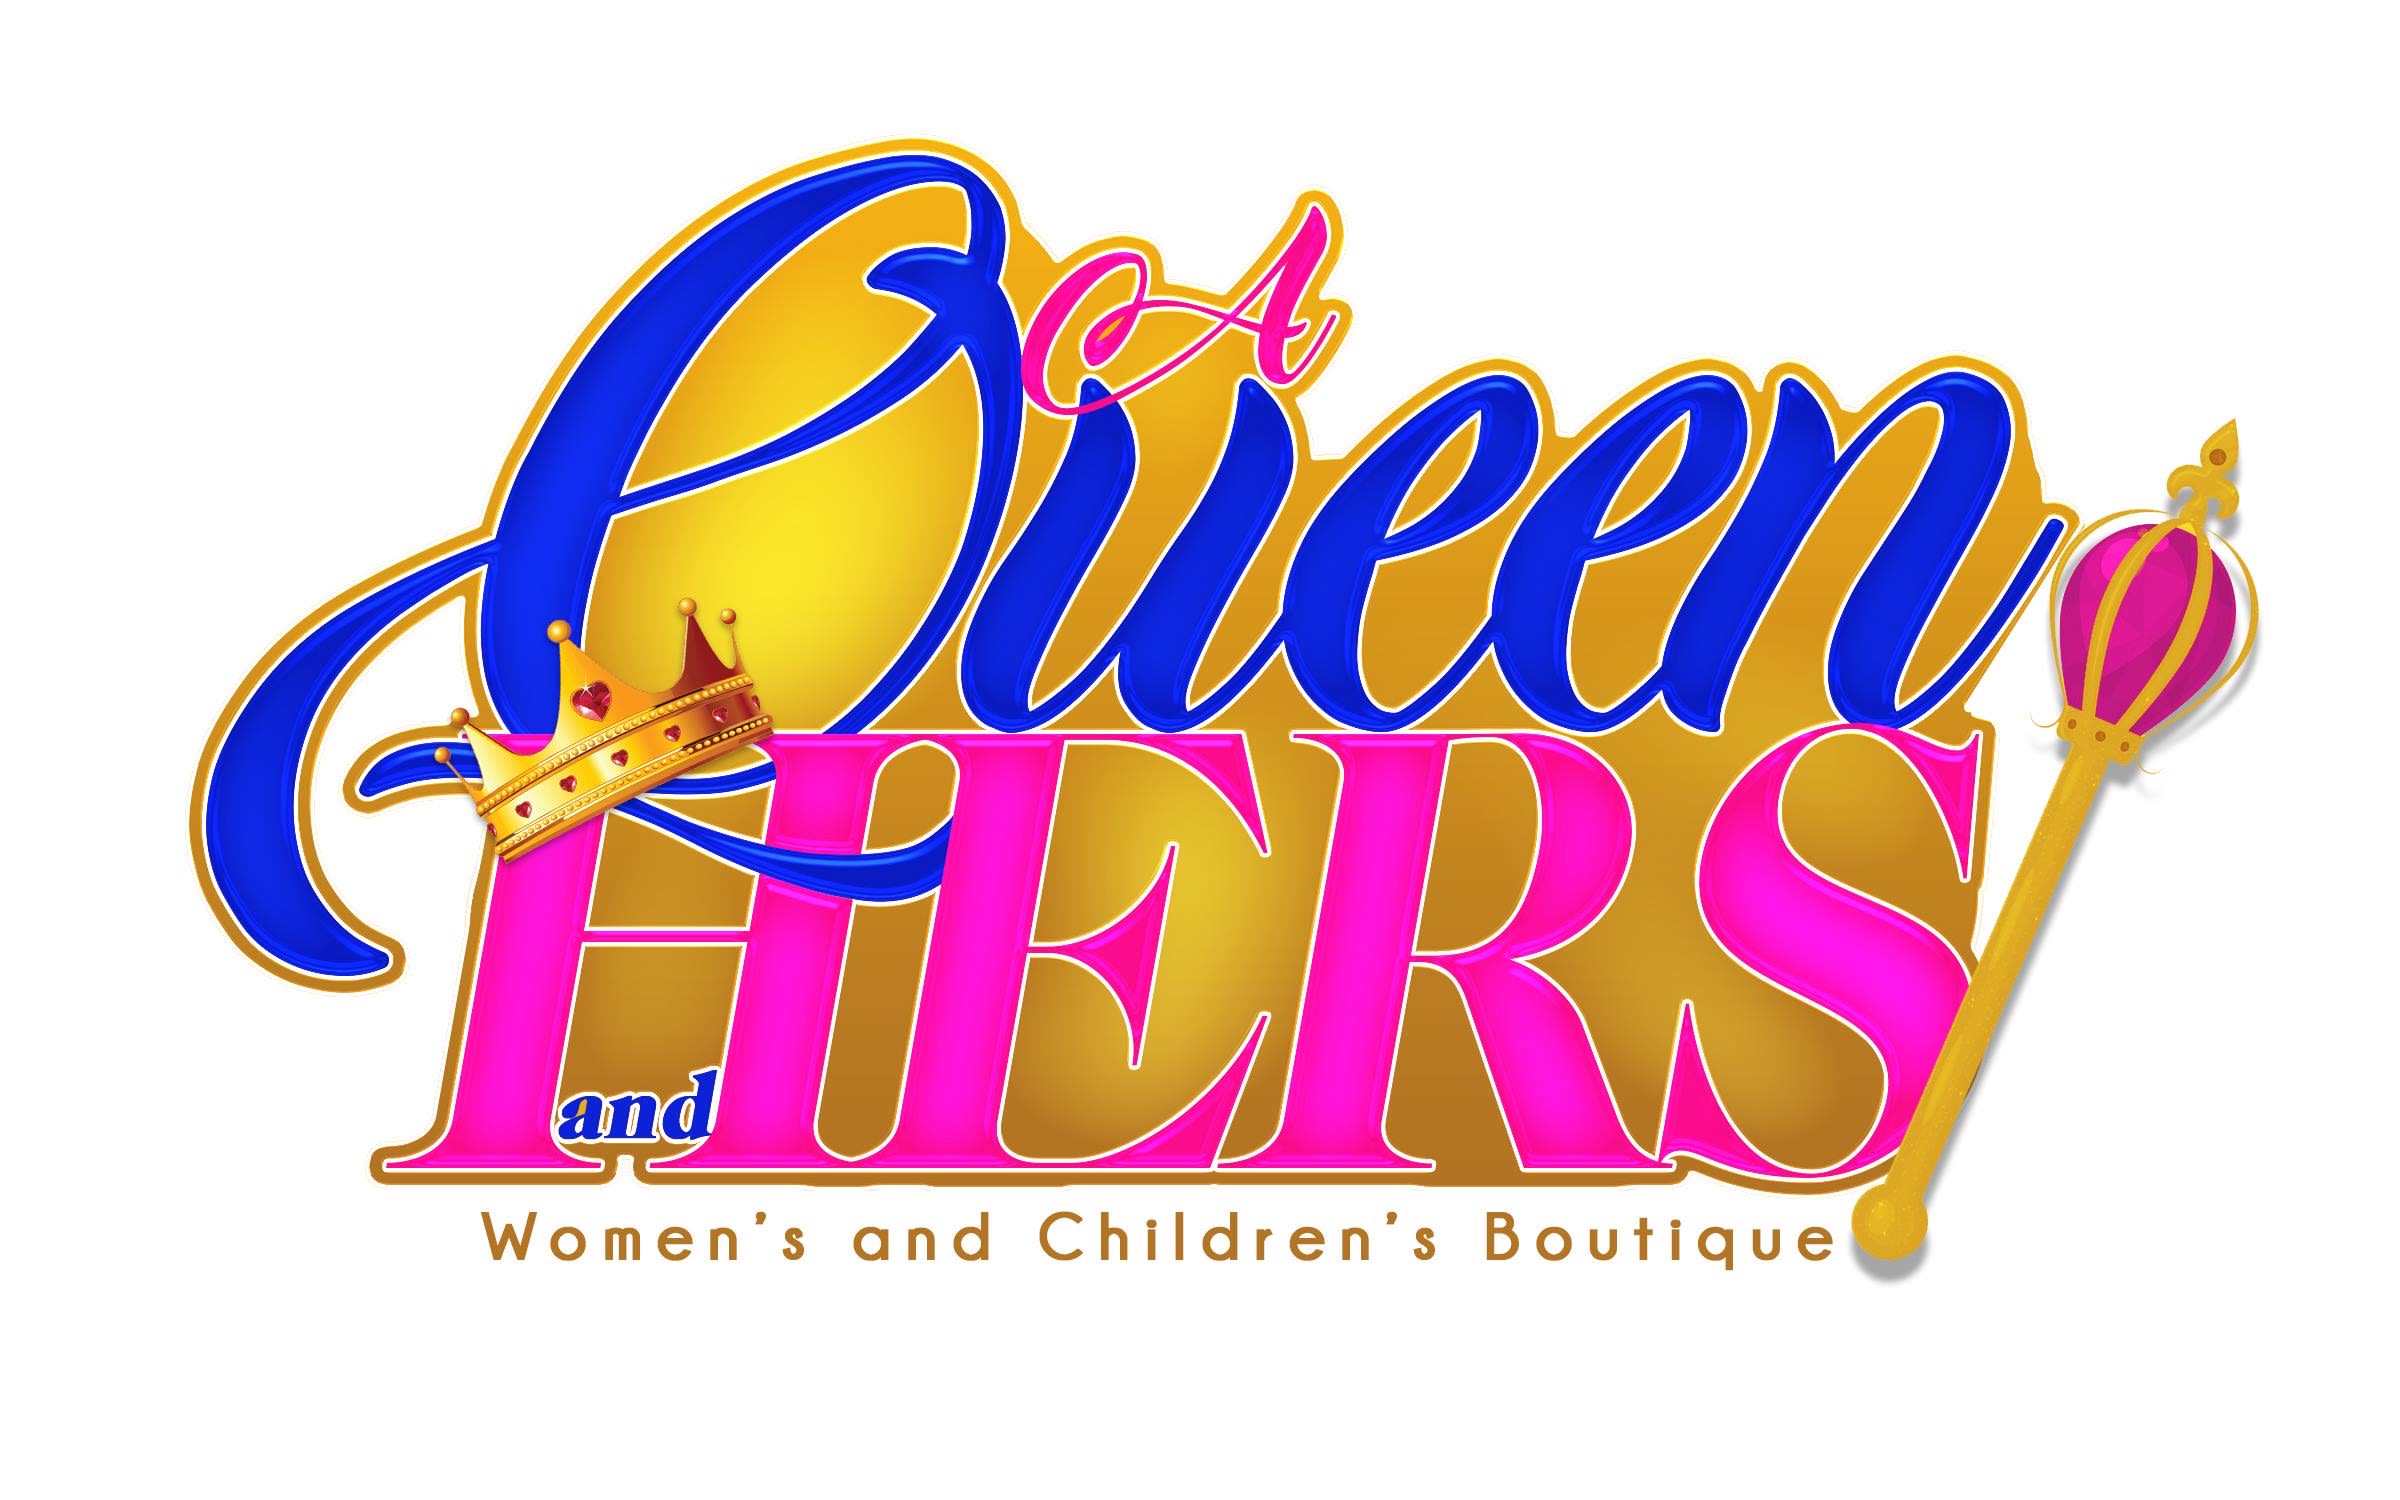 A Queen and Her's Women’s and Children’s Boutique